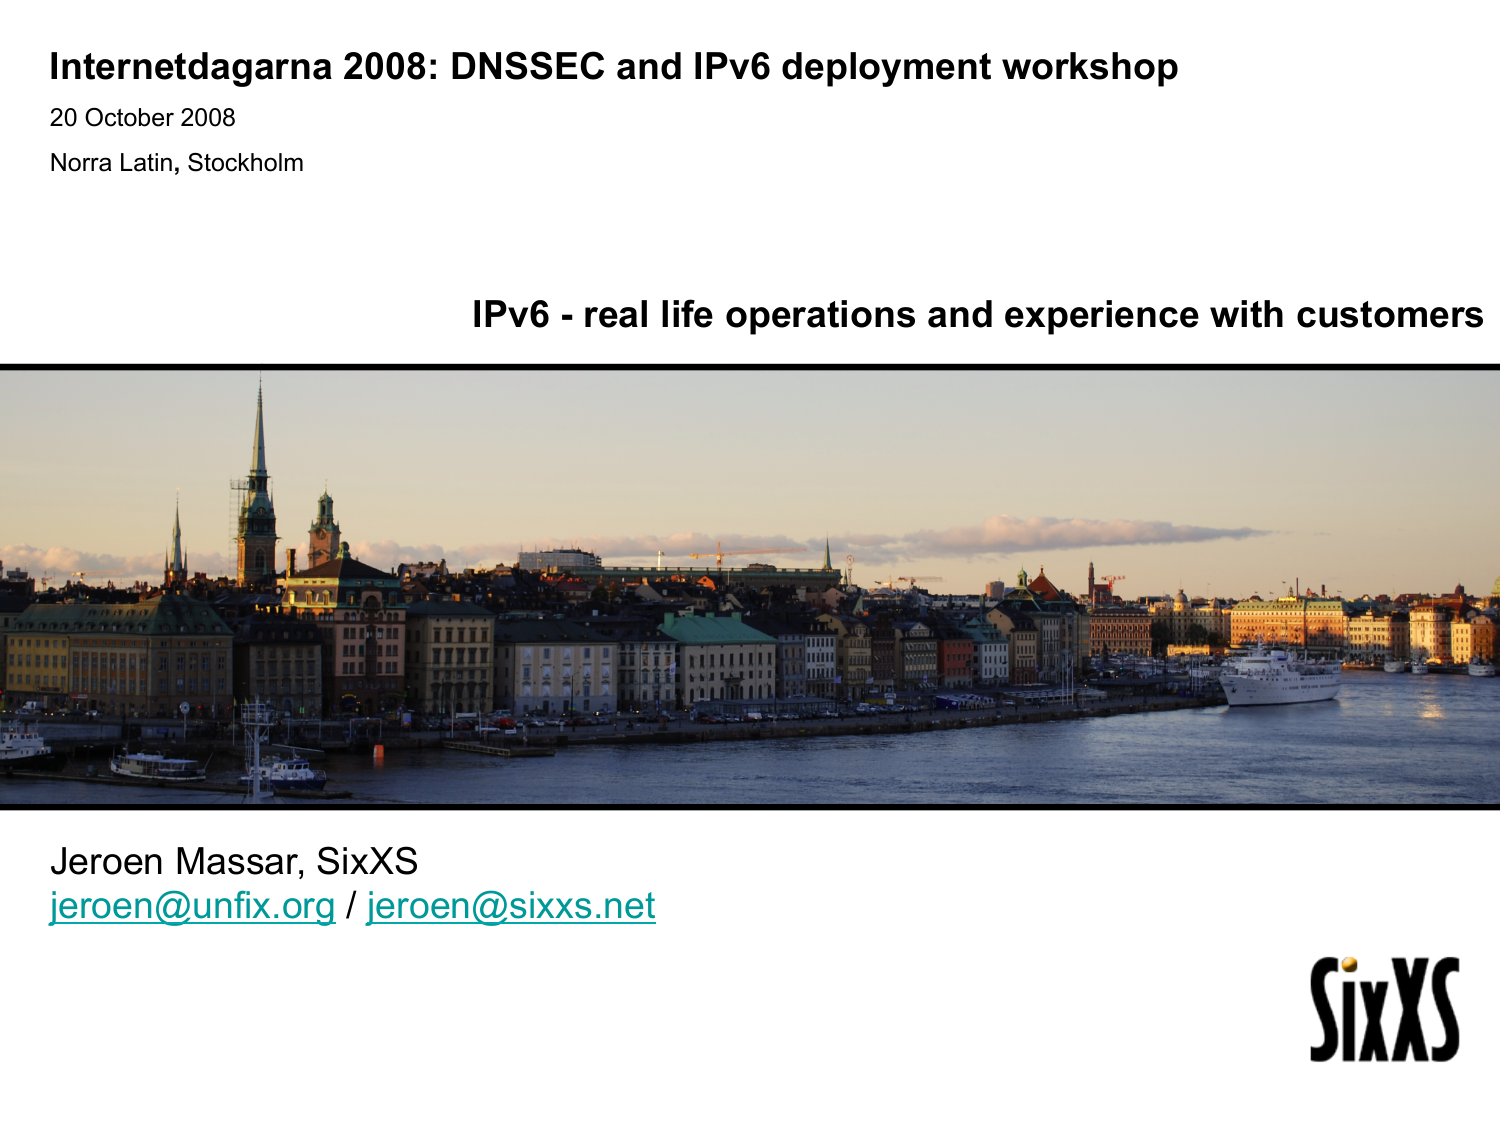 IPv6 - real life operations and experience with customers First Slide Image